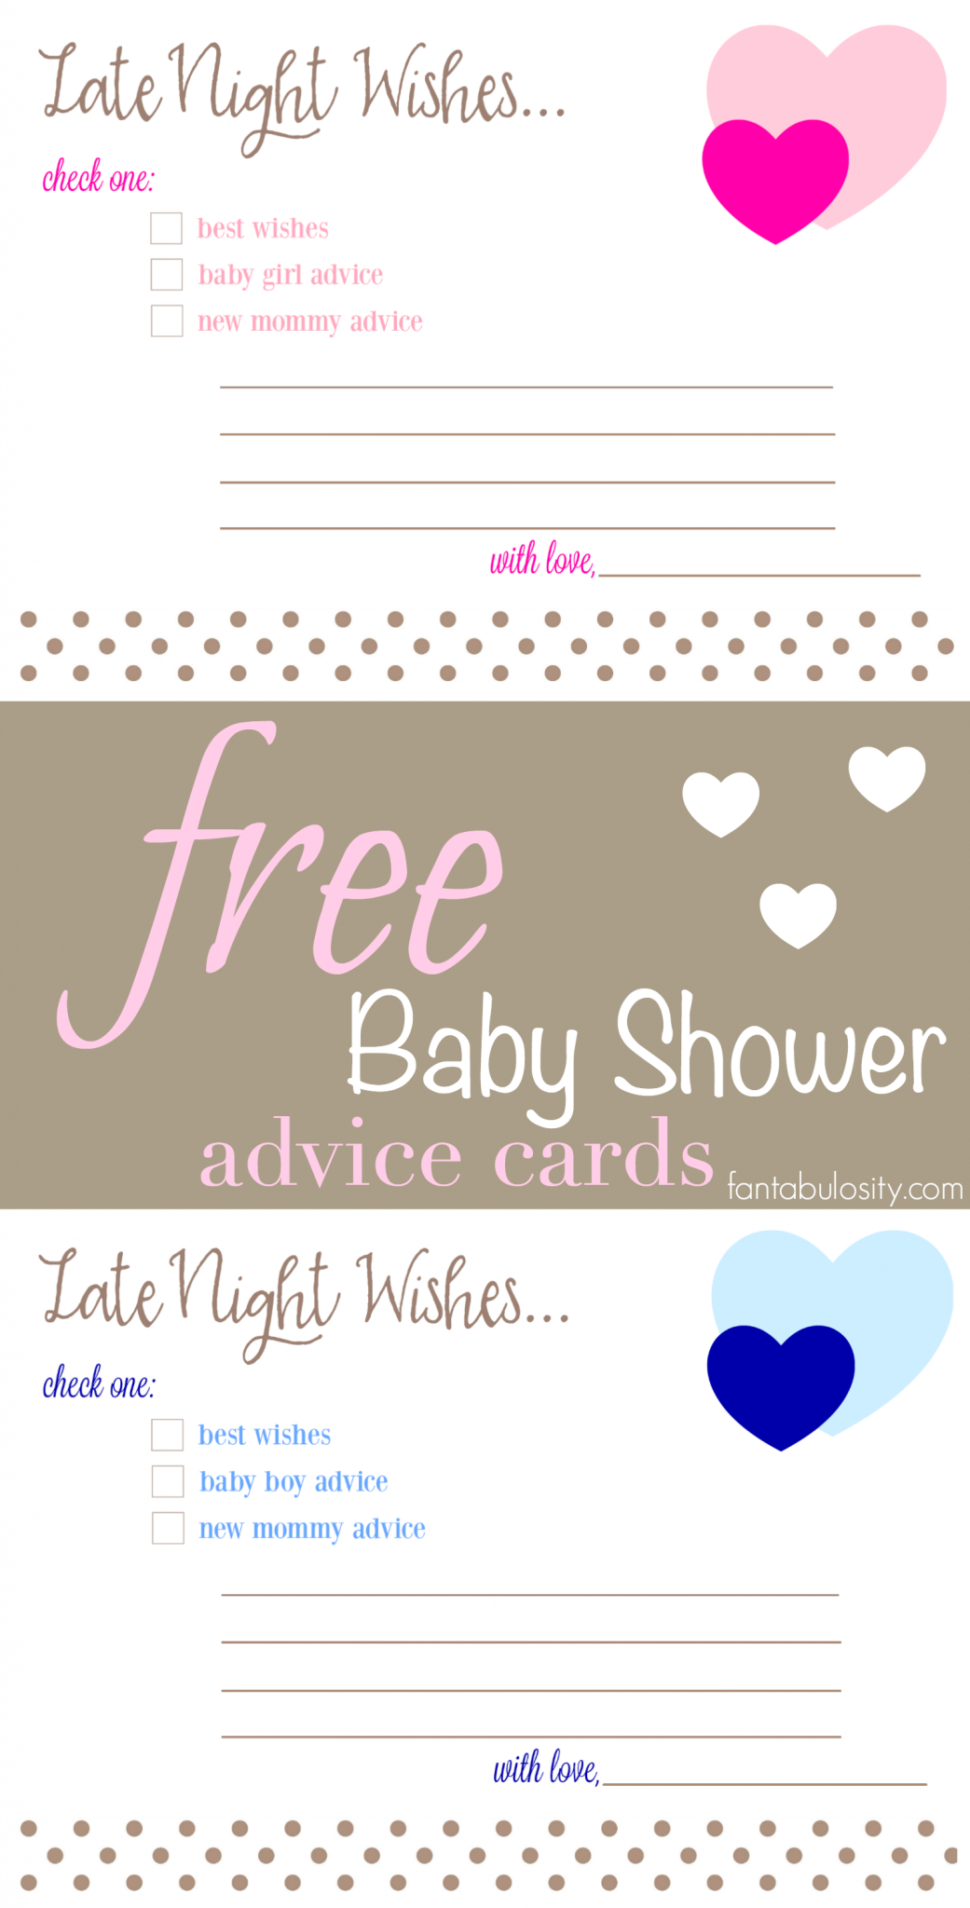 Medium Size of Baby Shower:stylish Baby Shower Wishes Picture Inspirations Baby Shower Wishes As Well As Baby Shower Greeting Cards With Baby Shower Wording Plus Baby Shower Gift Ideas Together With Baby Shower Gift List